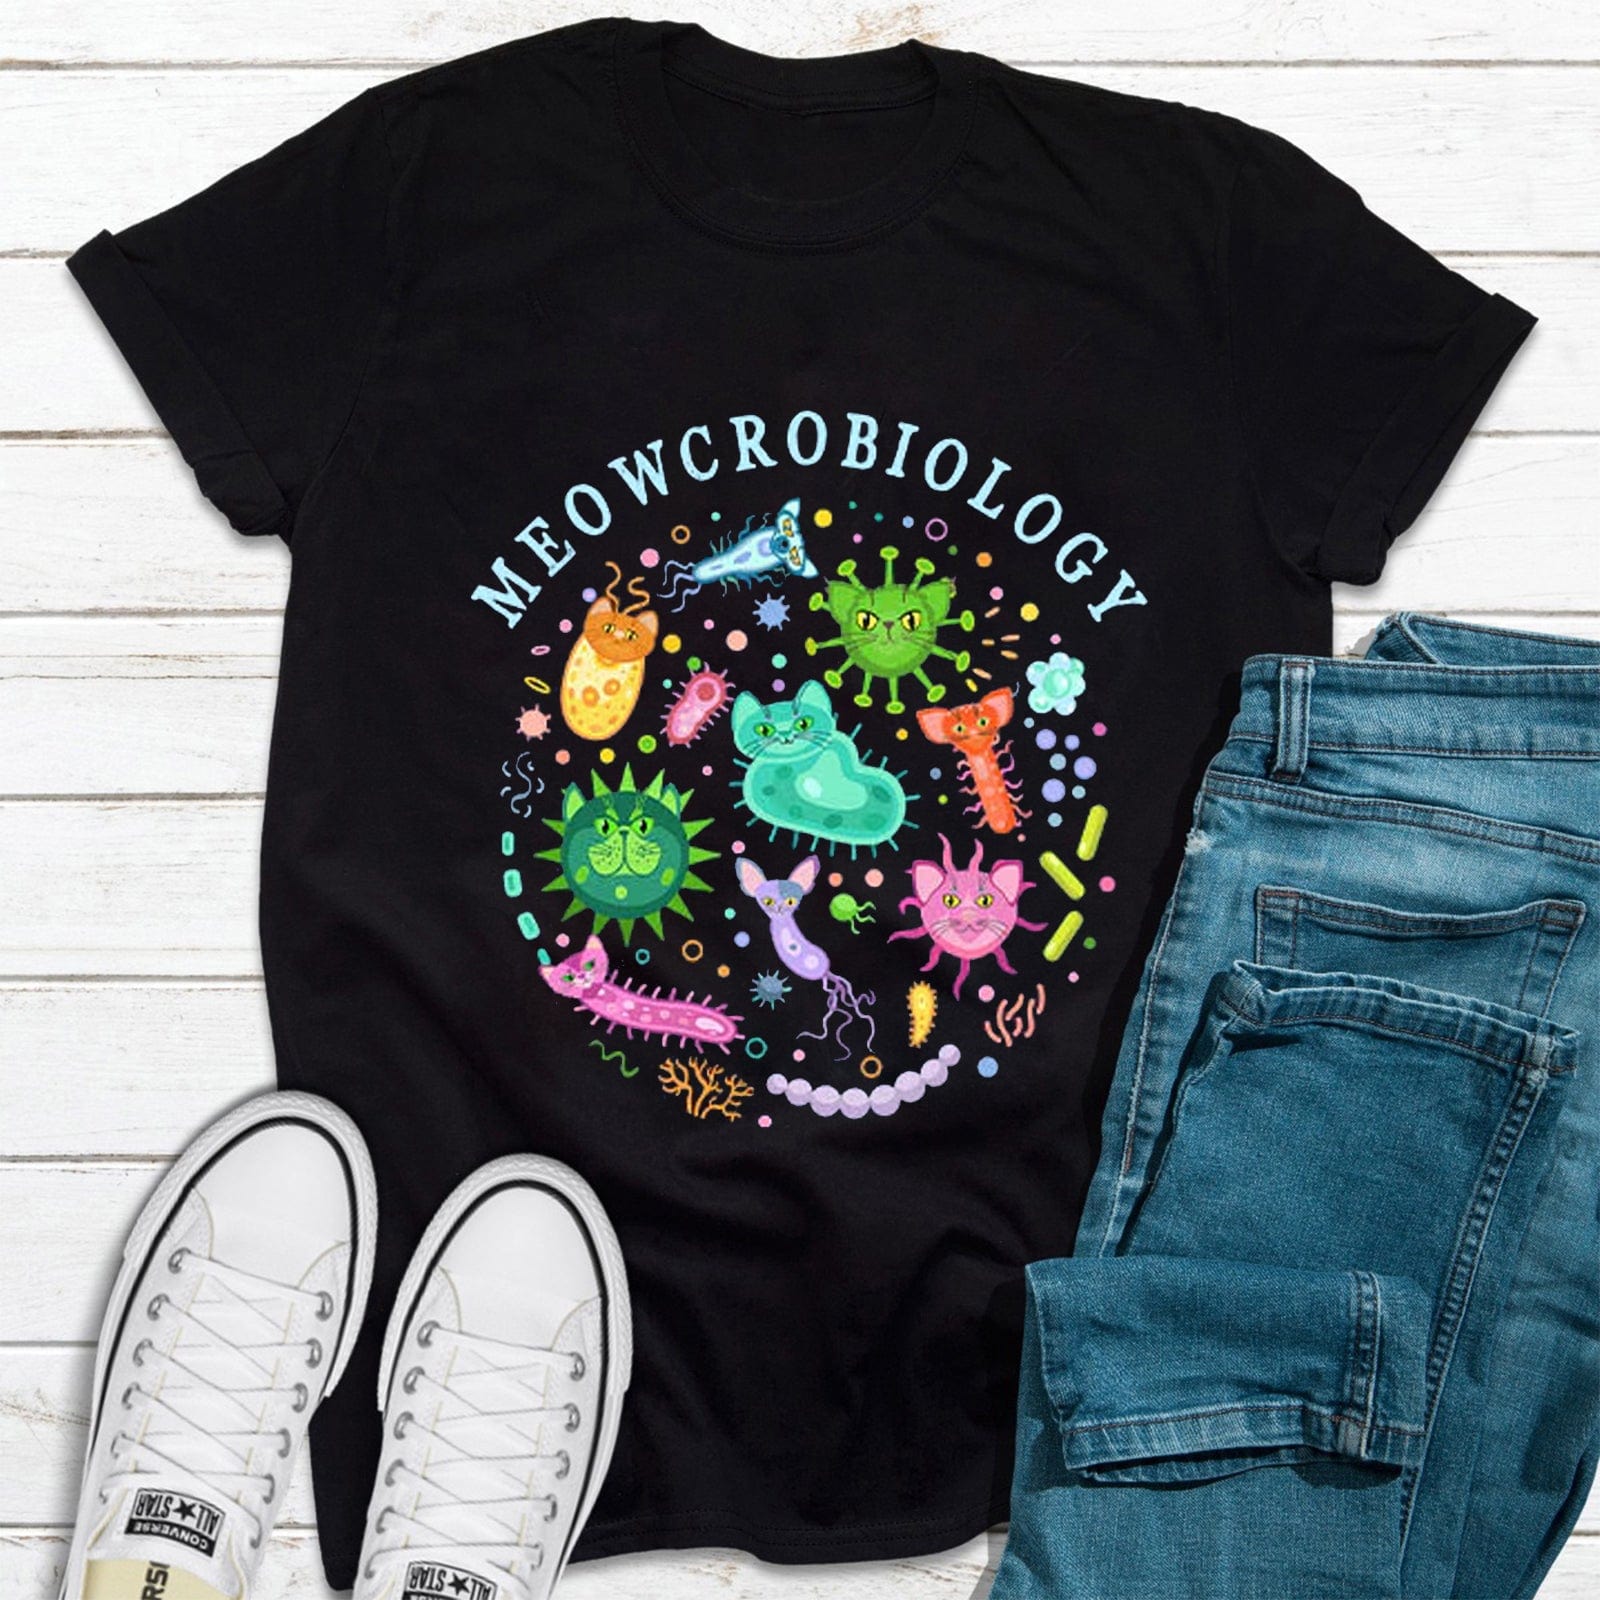 Meowcrobiology Funny Cat and Biology Science Shirt